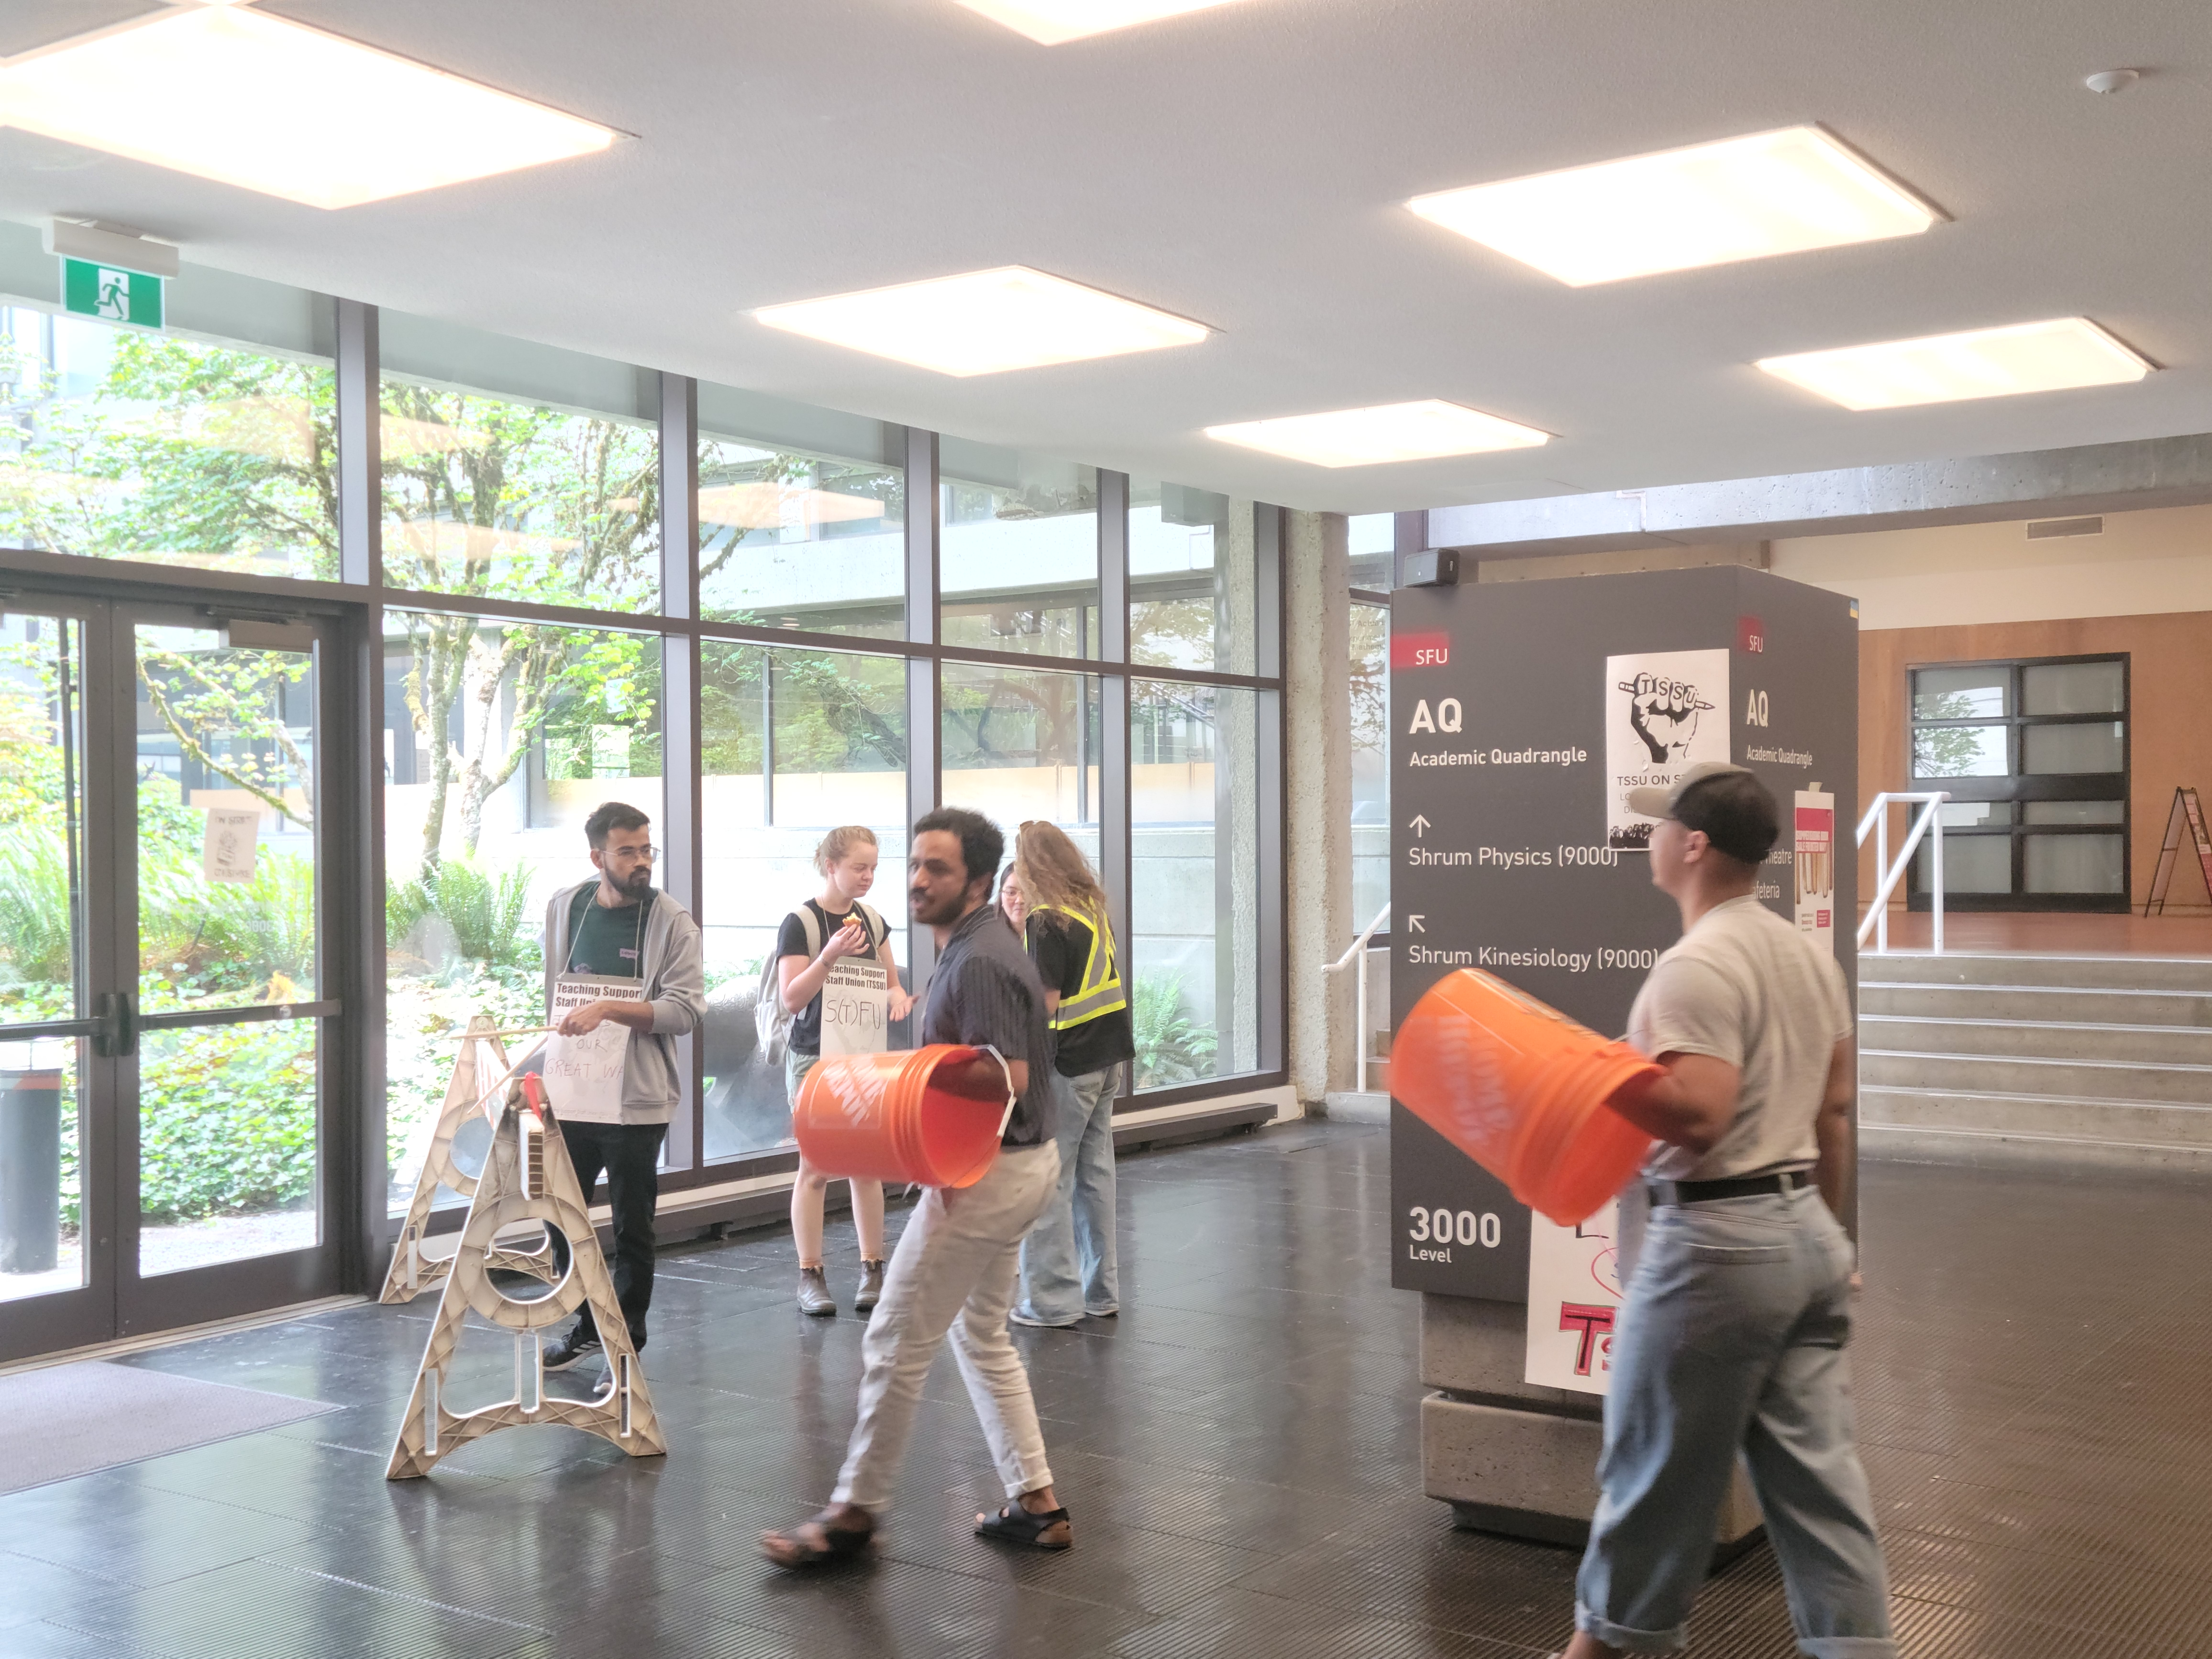 Six people forming a picket line with two people in the front holding an orange bucket as a drum. The location is at AQ Shrum Science building.